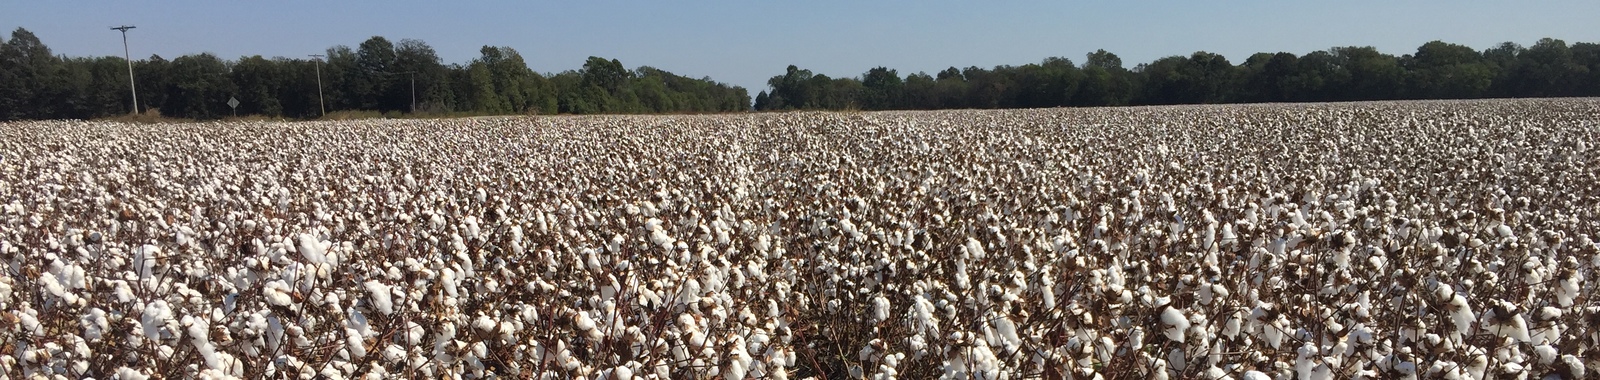 Increasing the Elongation of the Cotton Fibers